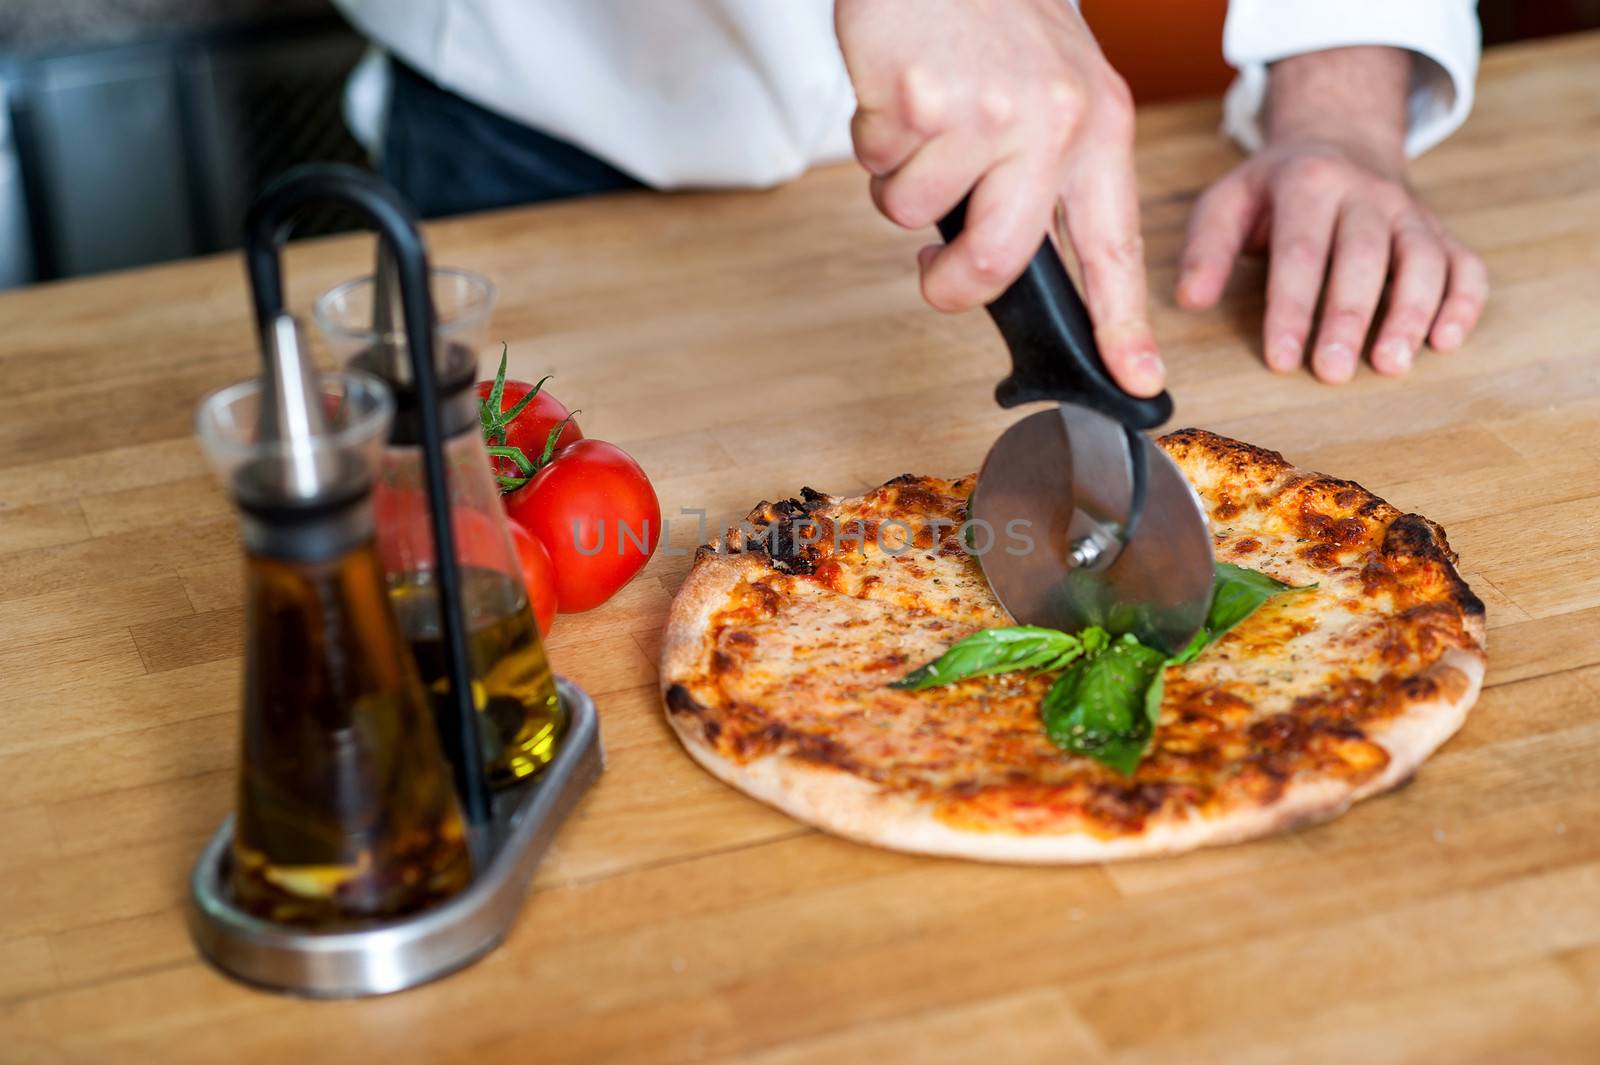 Male chef cutting hot pizza before delivery